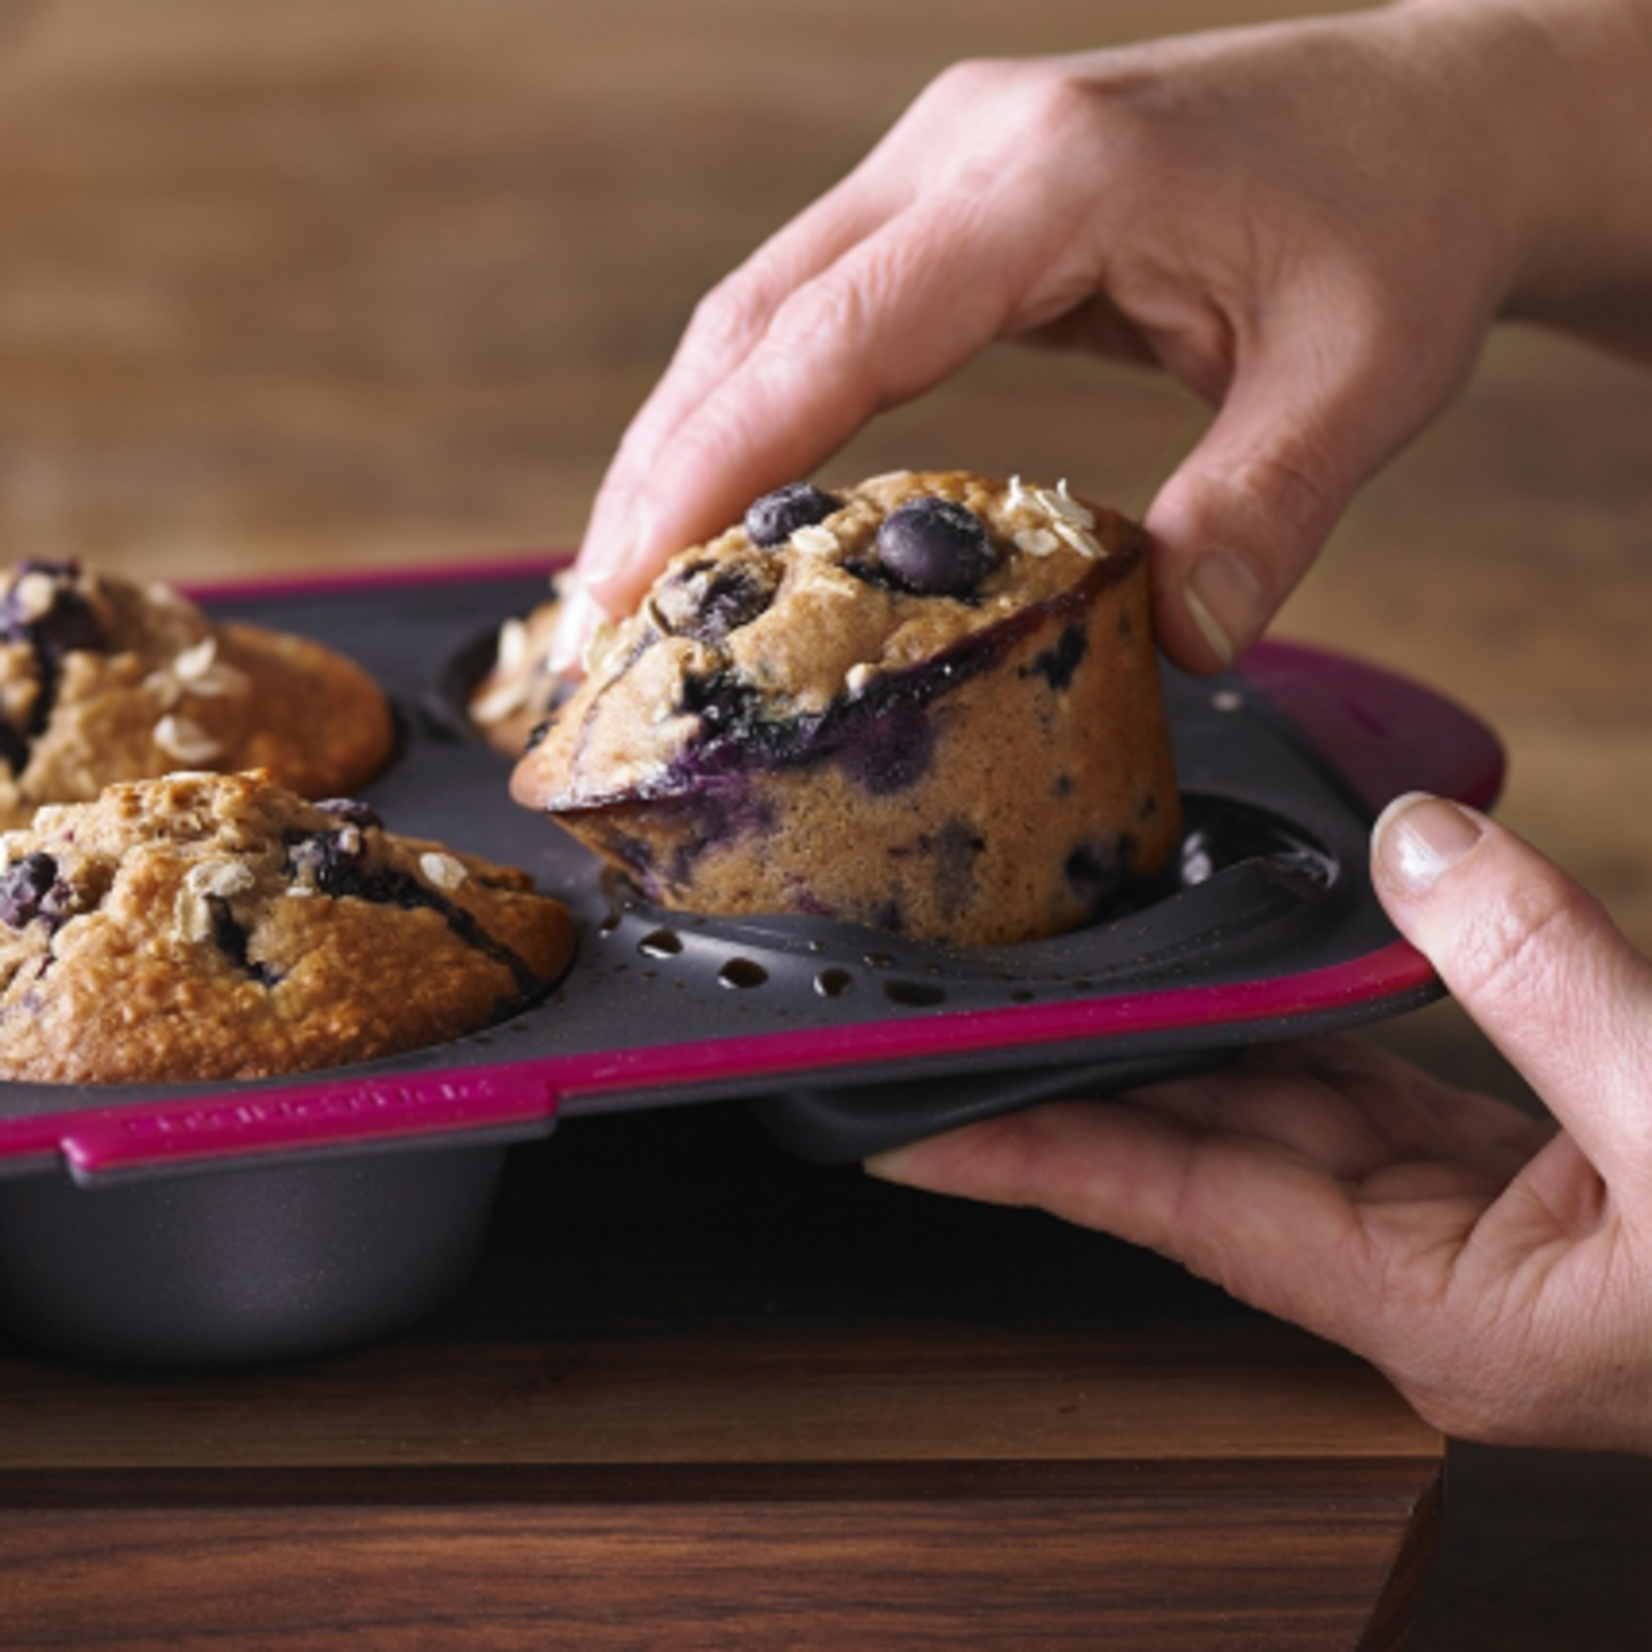 6 Cup Muffin Pan